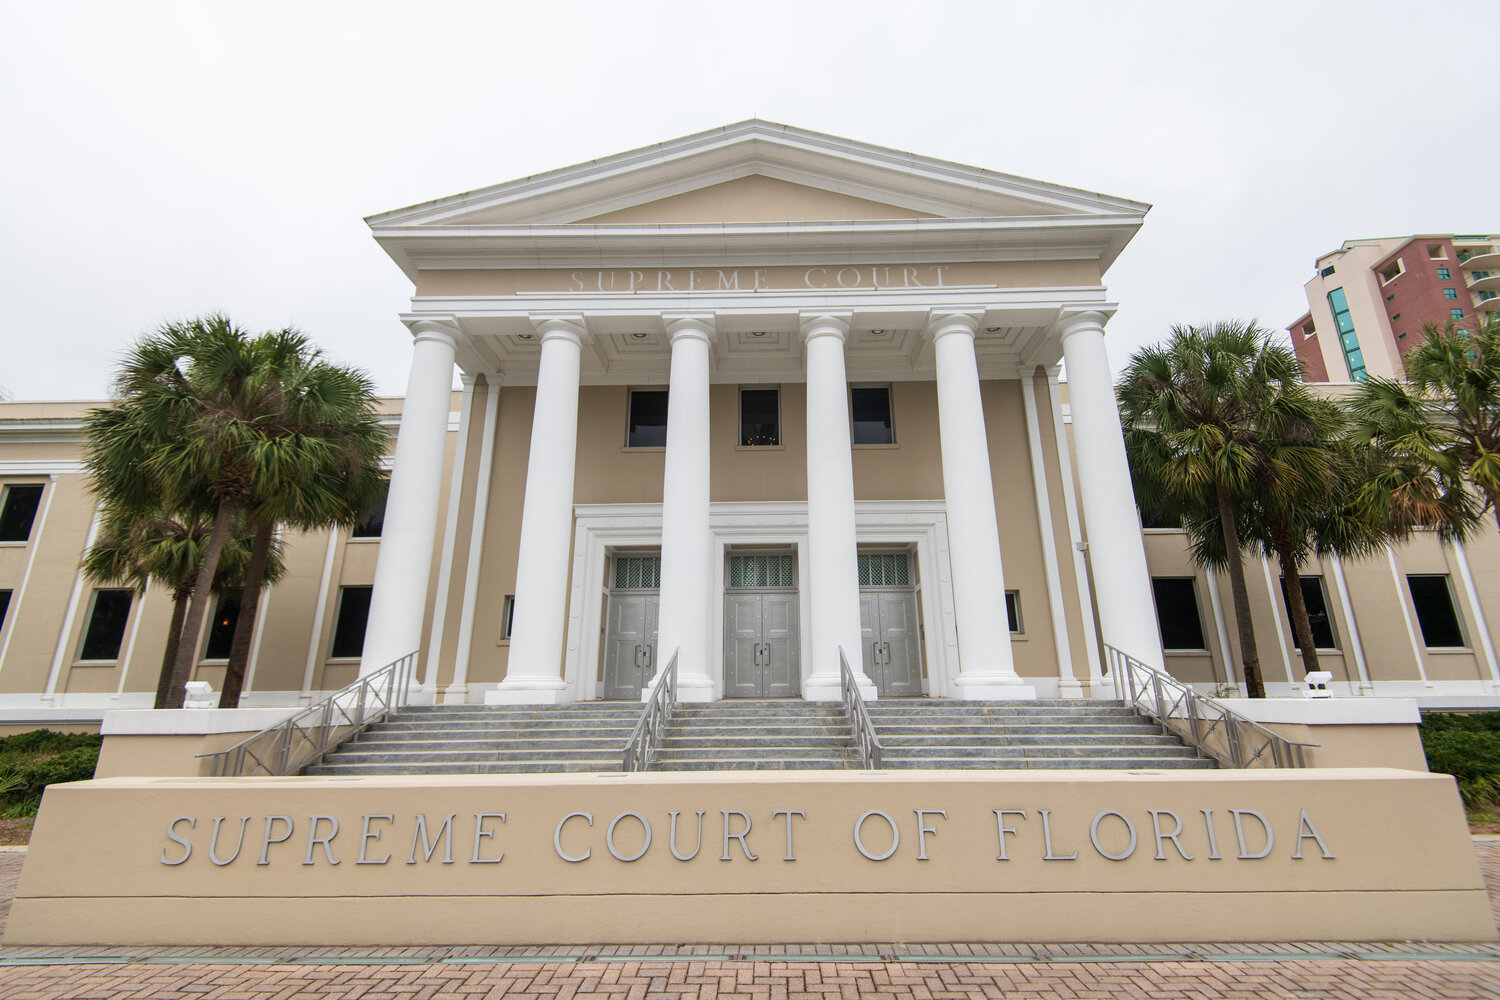 Florida’s Supreme Court is located at 500 S Duval St, in Tallahassee, Fla., Jan. 28, 2023.